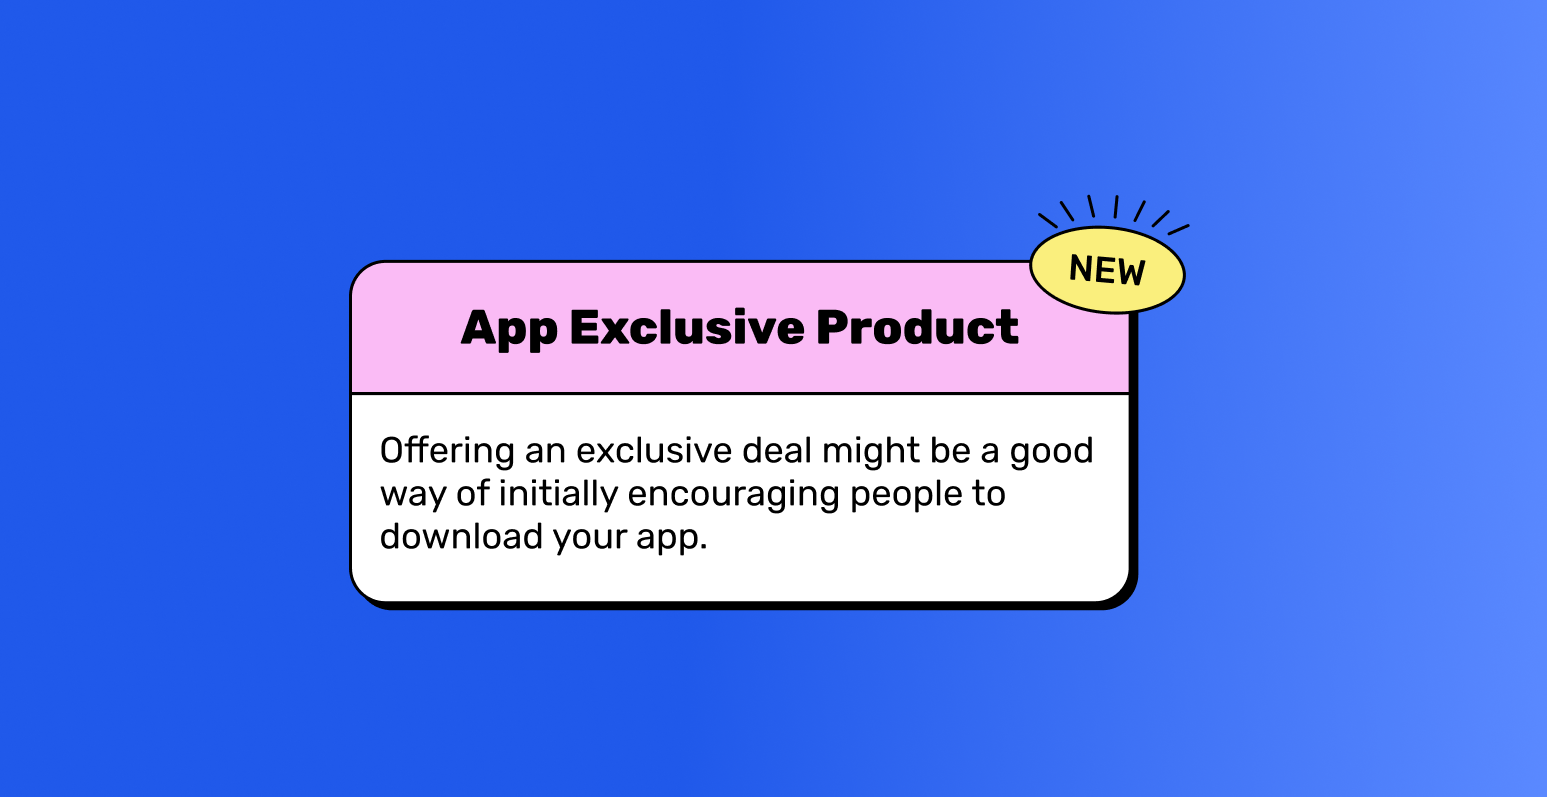 The image showcases a box labeled "App Exclusive Product" along with a description below it.